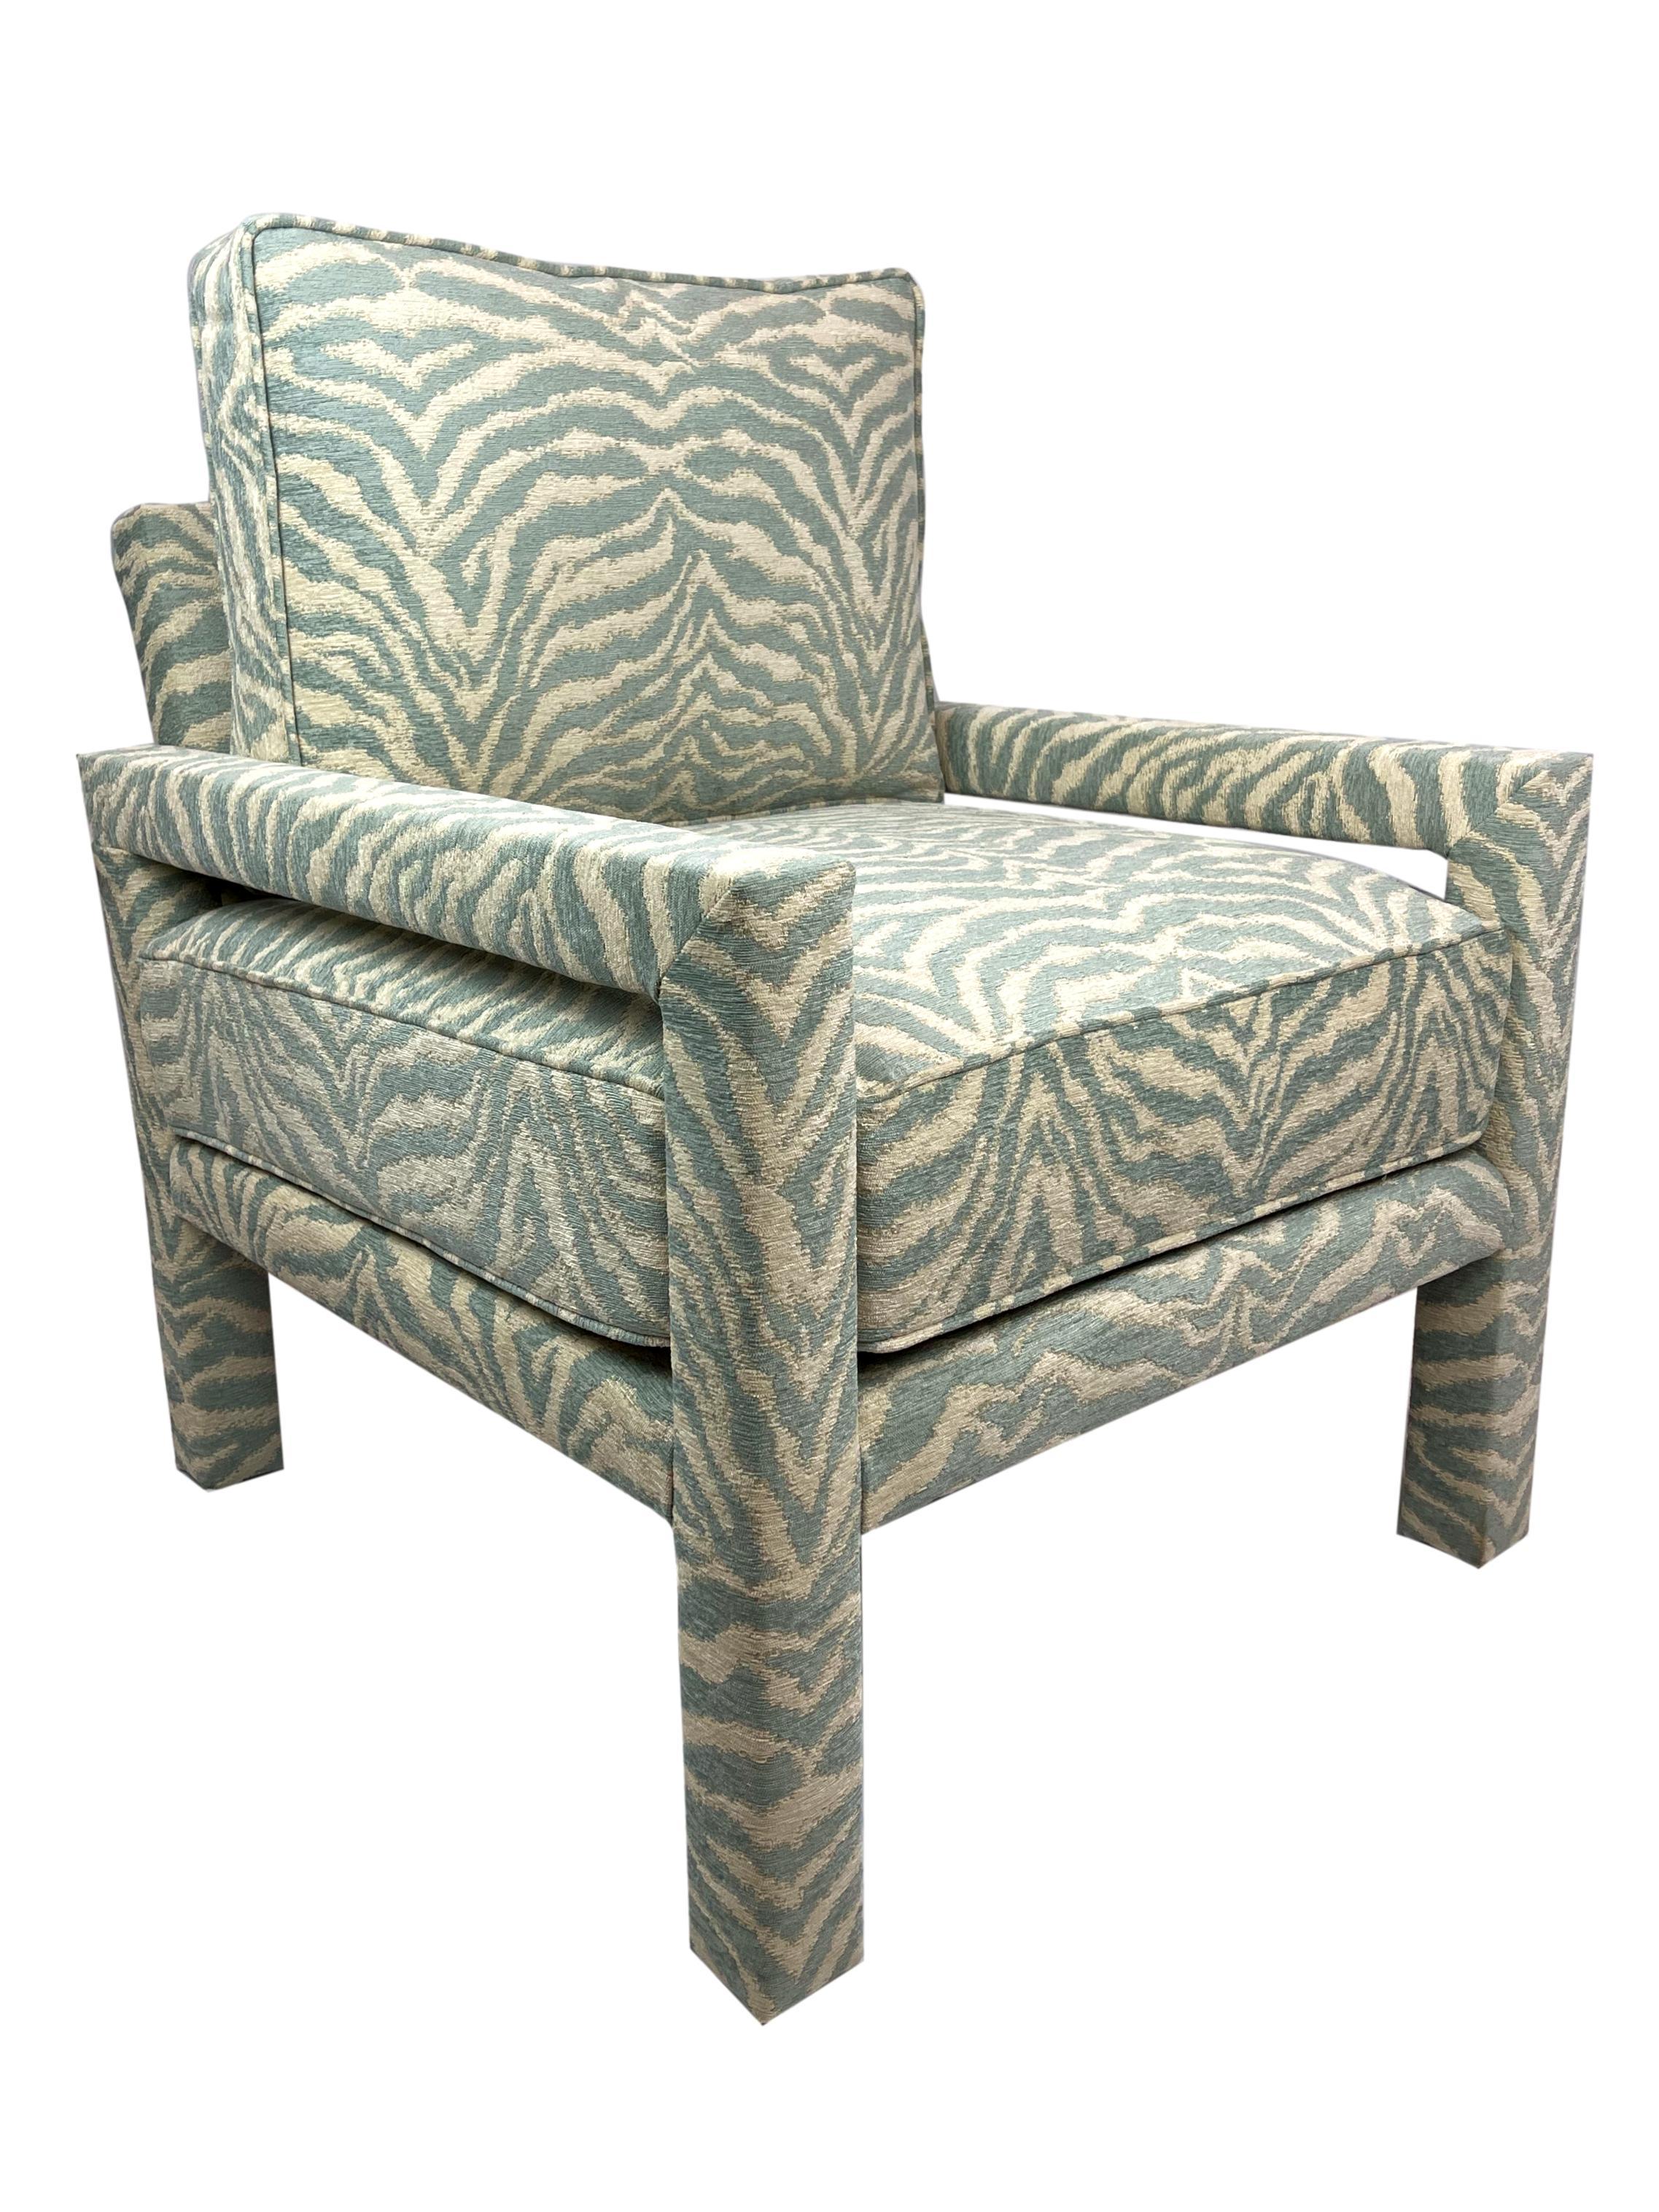 Hand-Crafted New Pair of Milo Baughman Style Parsons Chairs in Designer Celadon Zebra Fabric For Sale